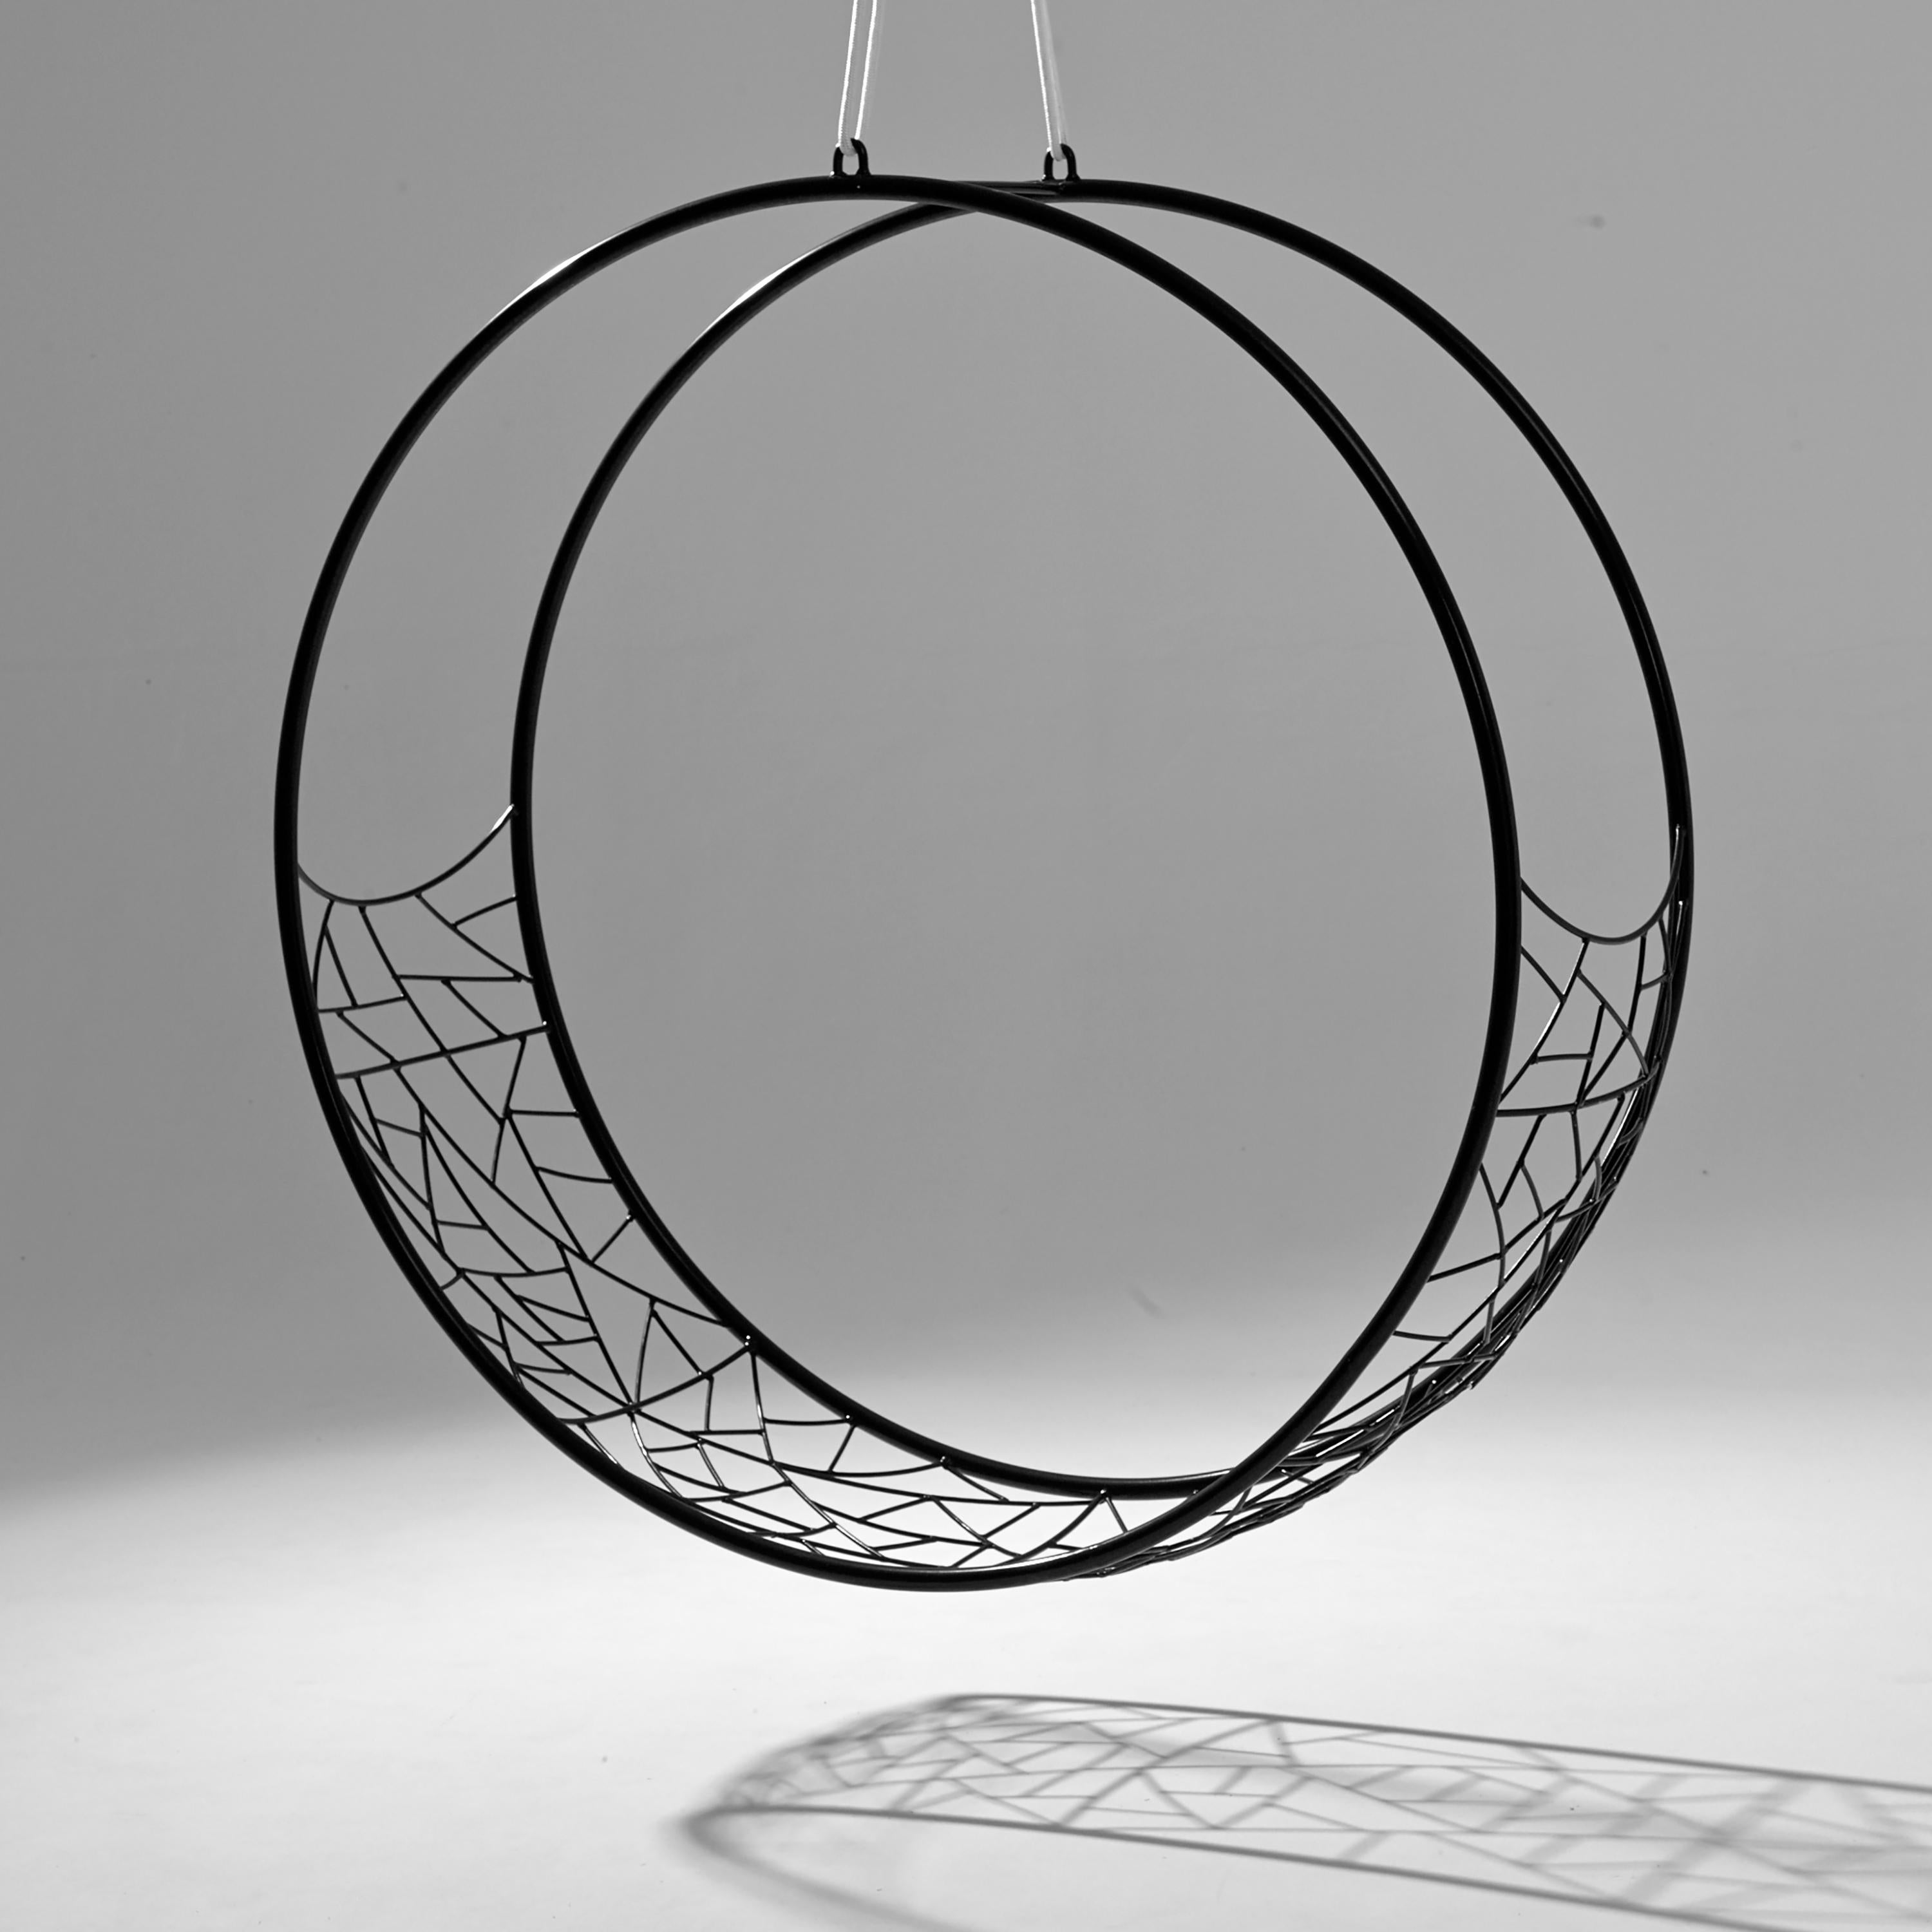 The WHEEL swing seat is sculptural and dynamic. Its striking circular shape lends itself for use as a functional art piece.
The chair has an open yet enveloping feel. 
The pattern detail is inspired by nature and reminiscent of the veins in